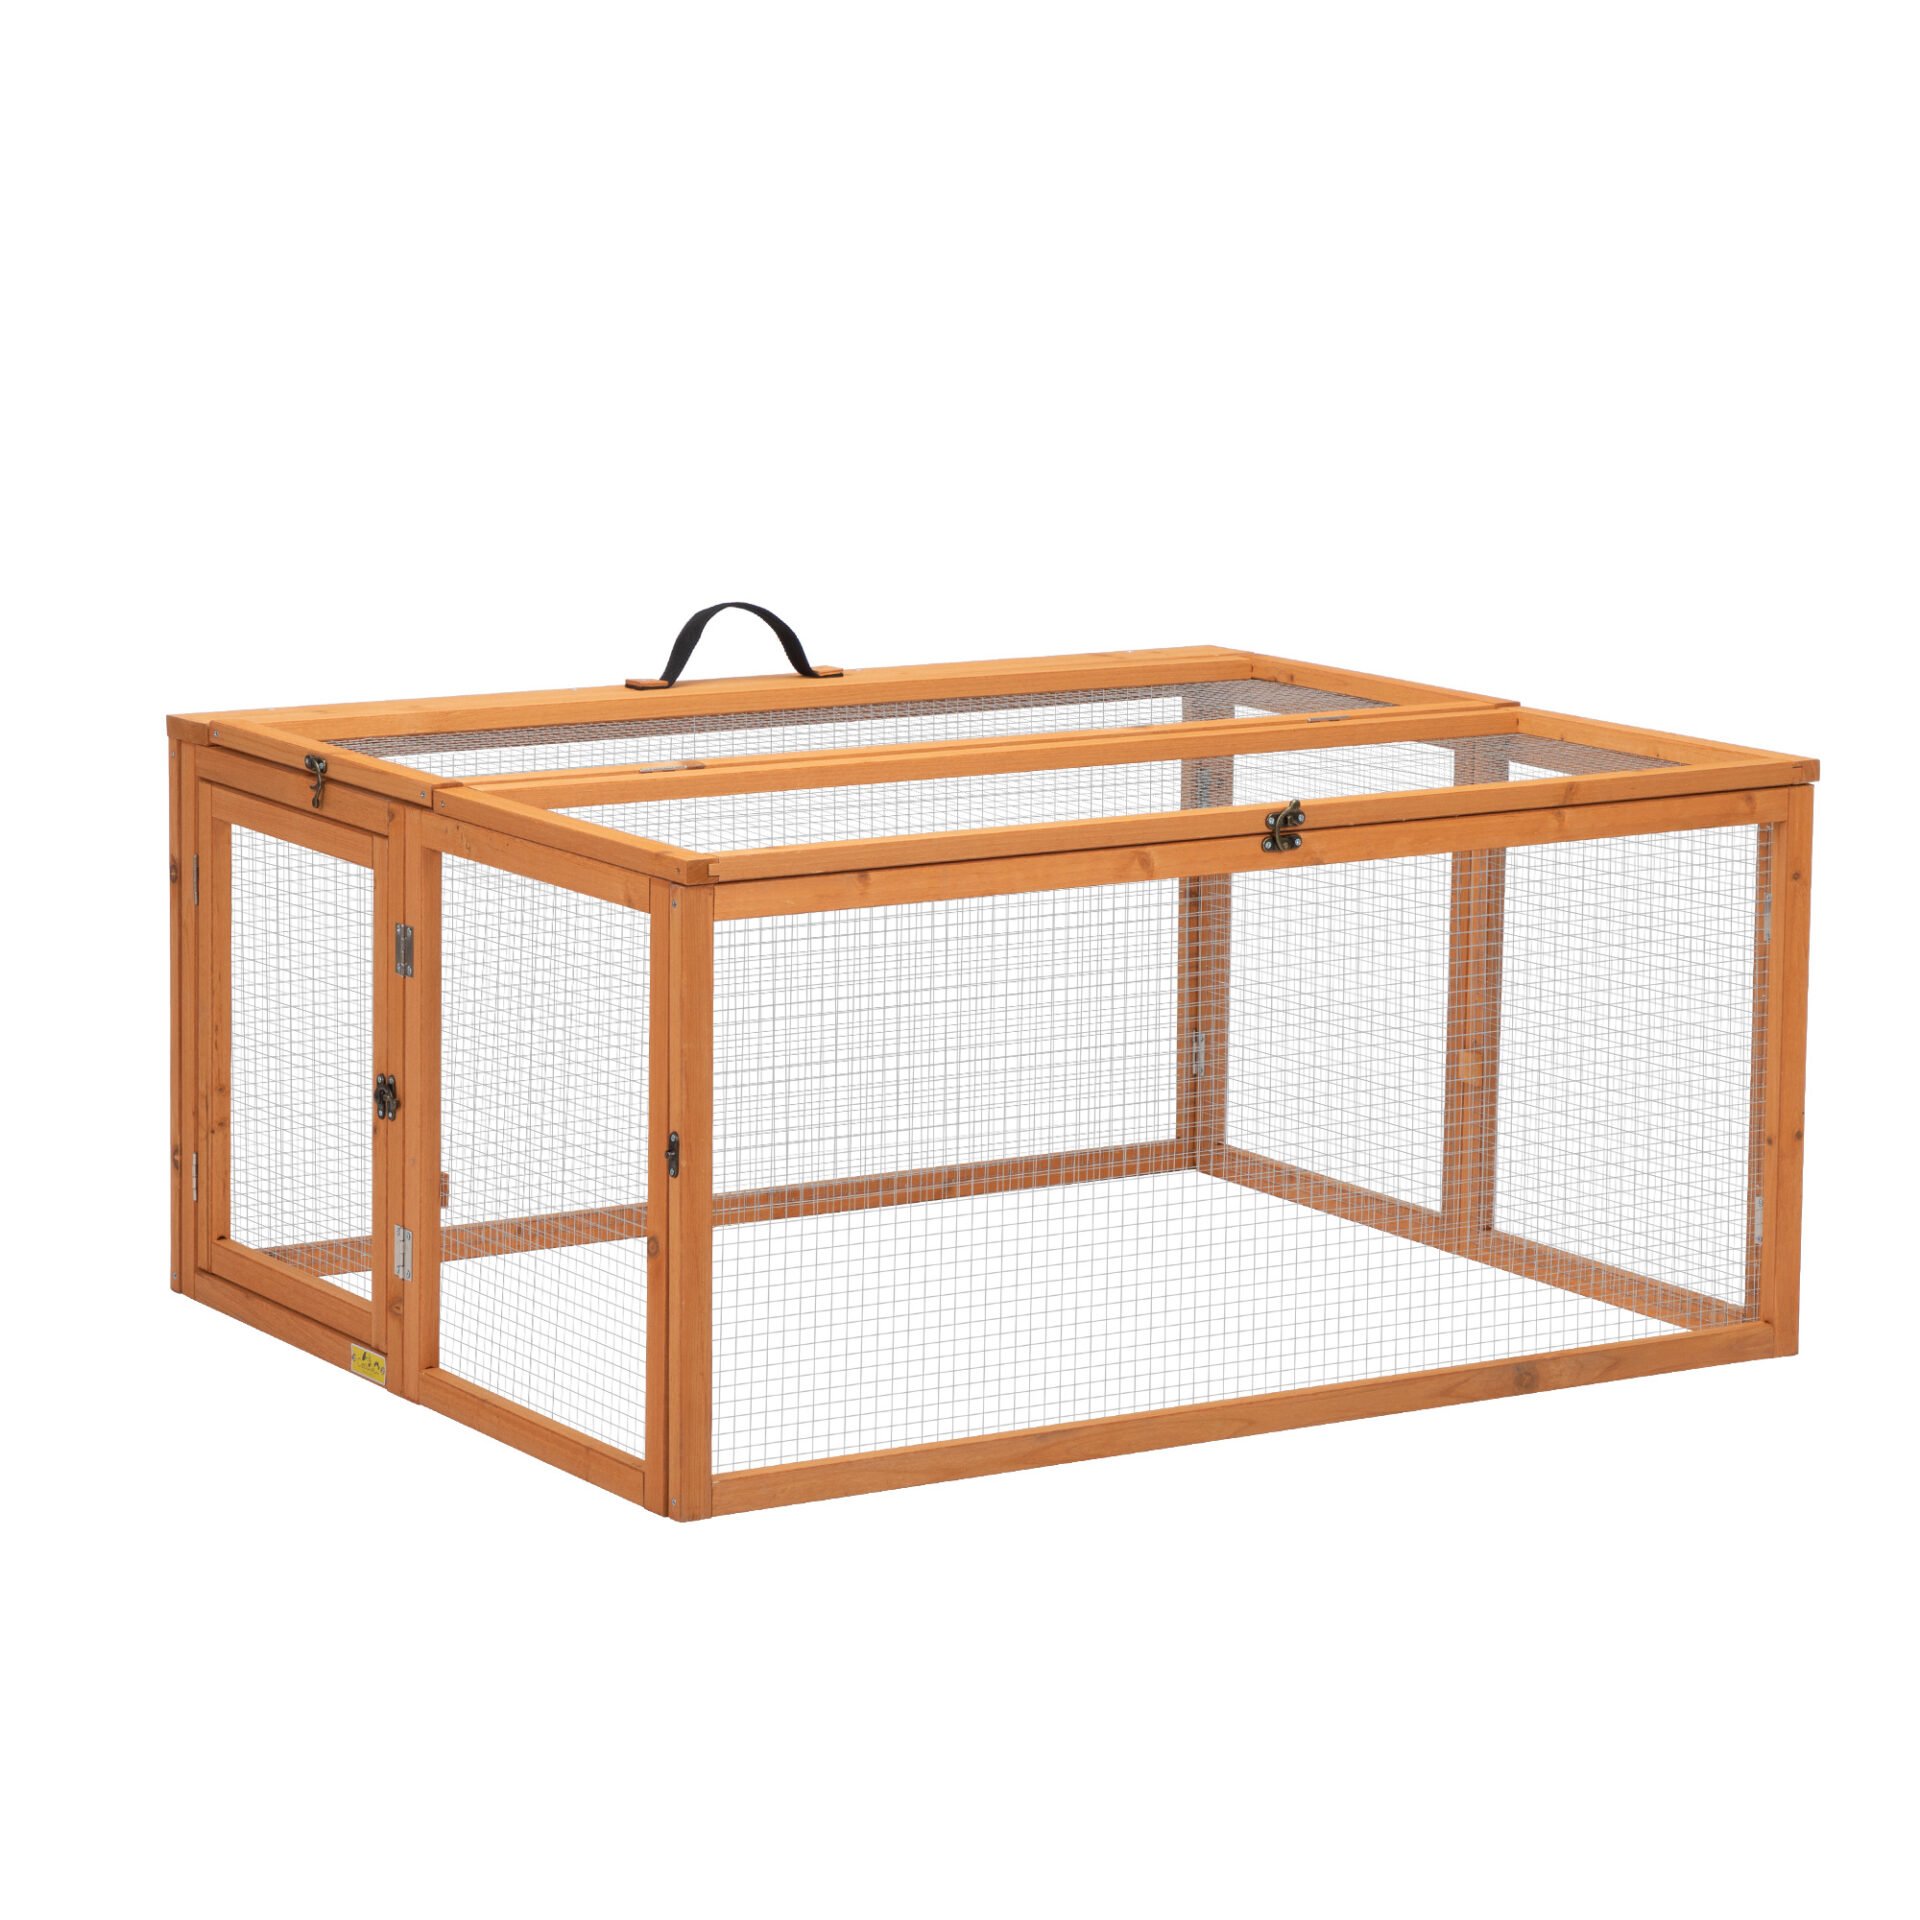 Coziwow Portable Folding Rabbit Hutch Outdoor Small Animal Coop Farm  Enclosure with Openable Top, Wire-Mesh Windows, Orange - Coziwow